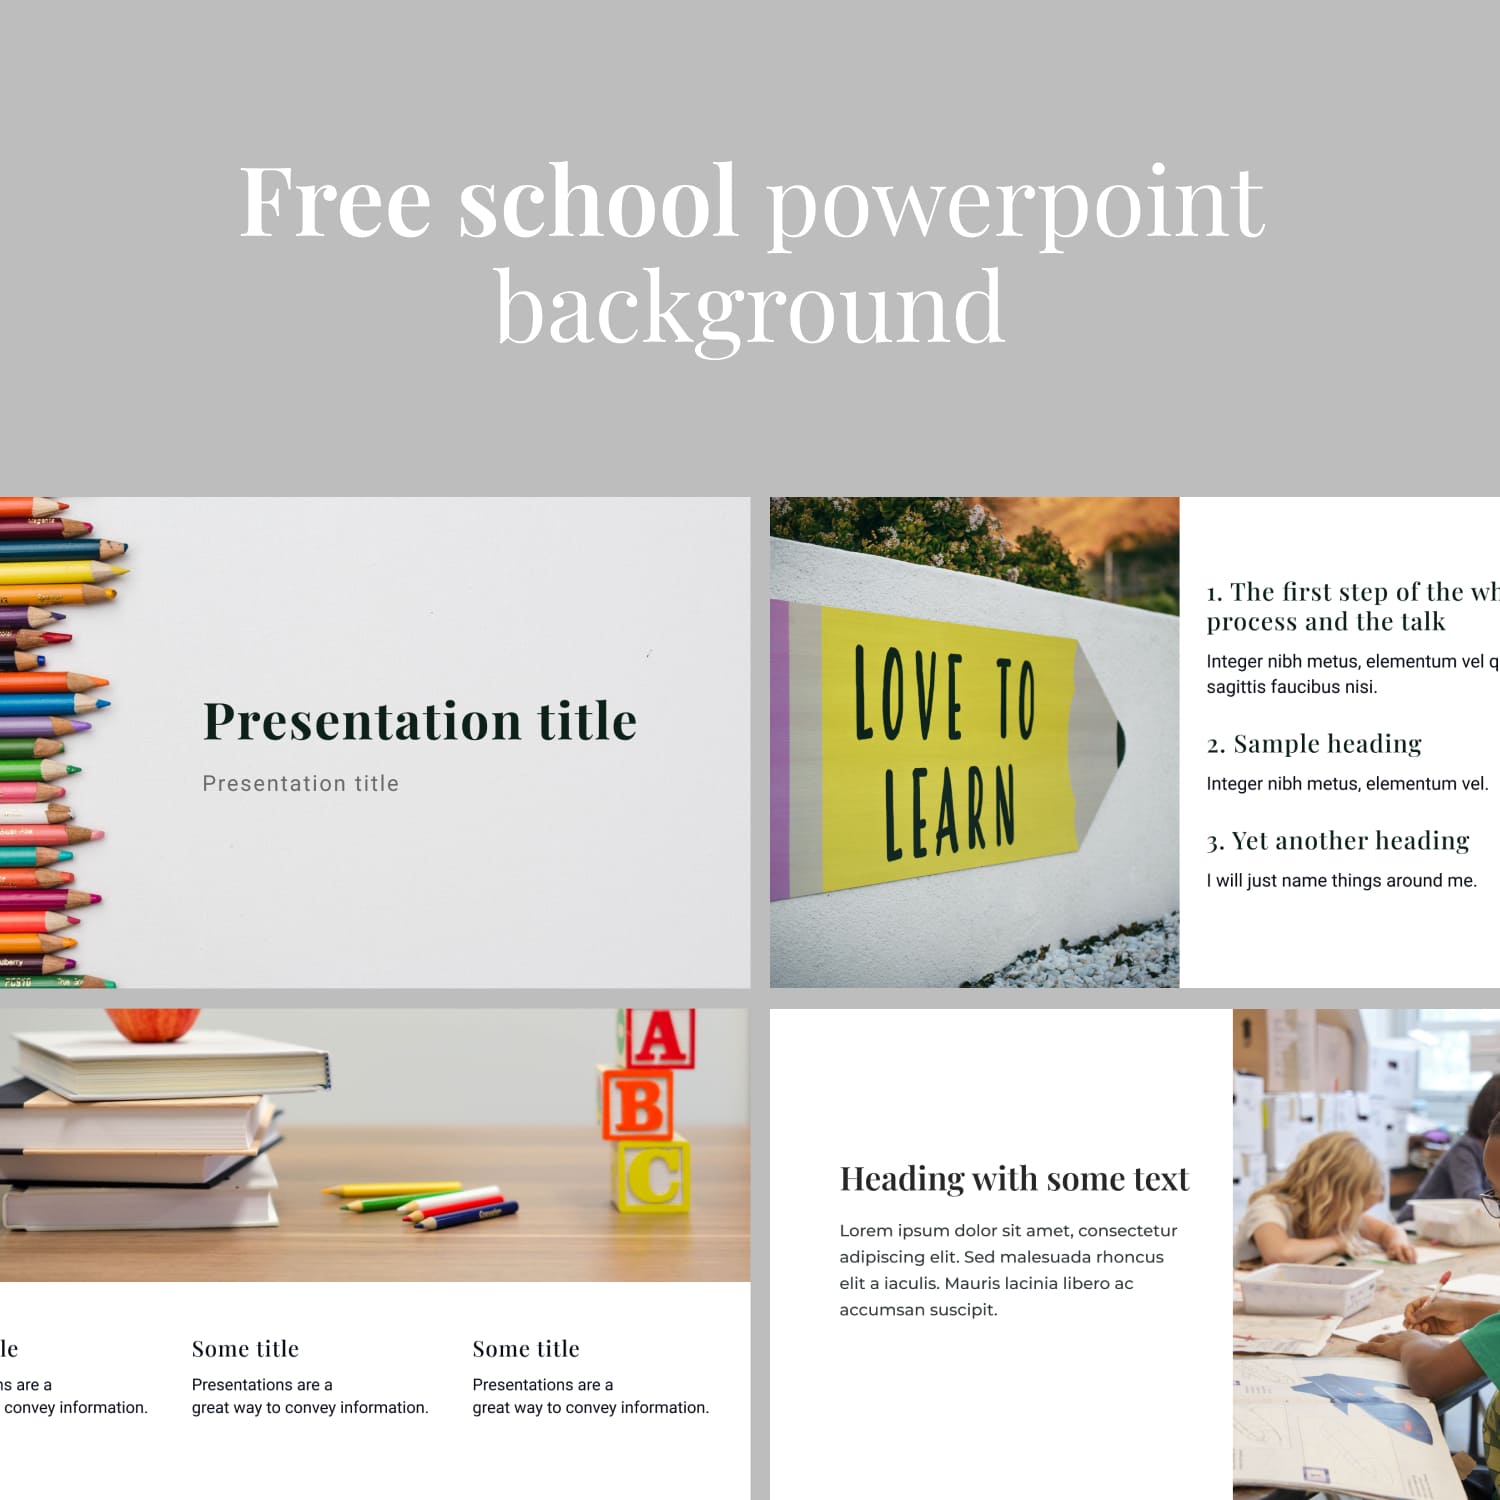 Preview Free School Powerpoint Background 1500x1500 1.